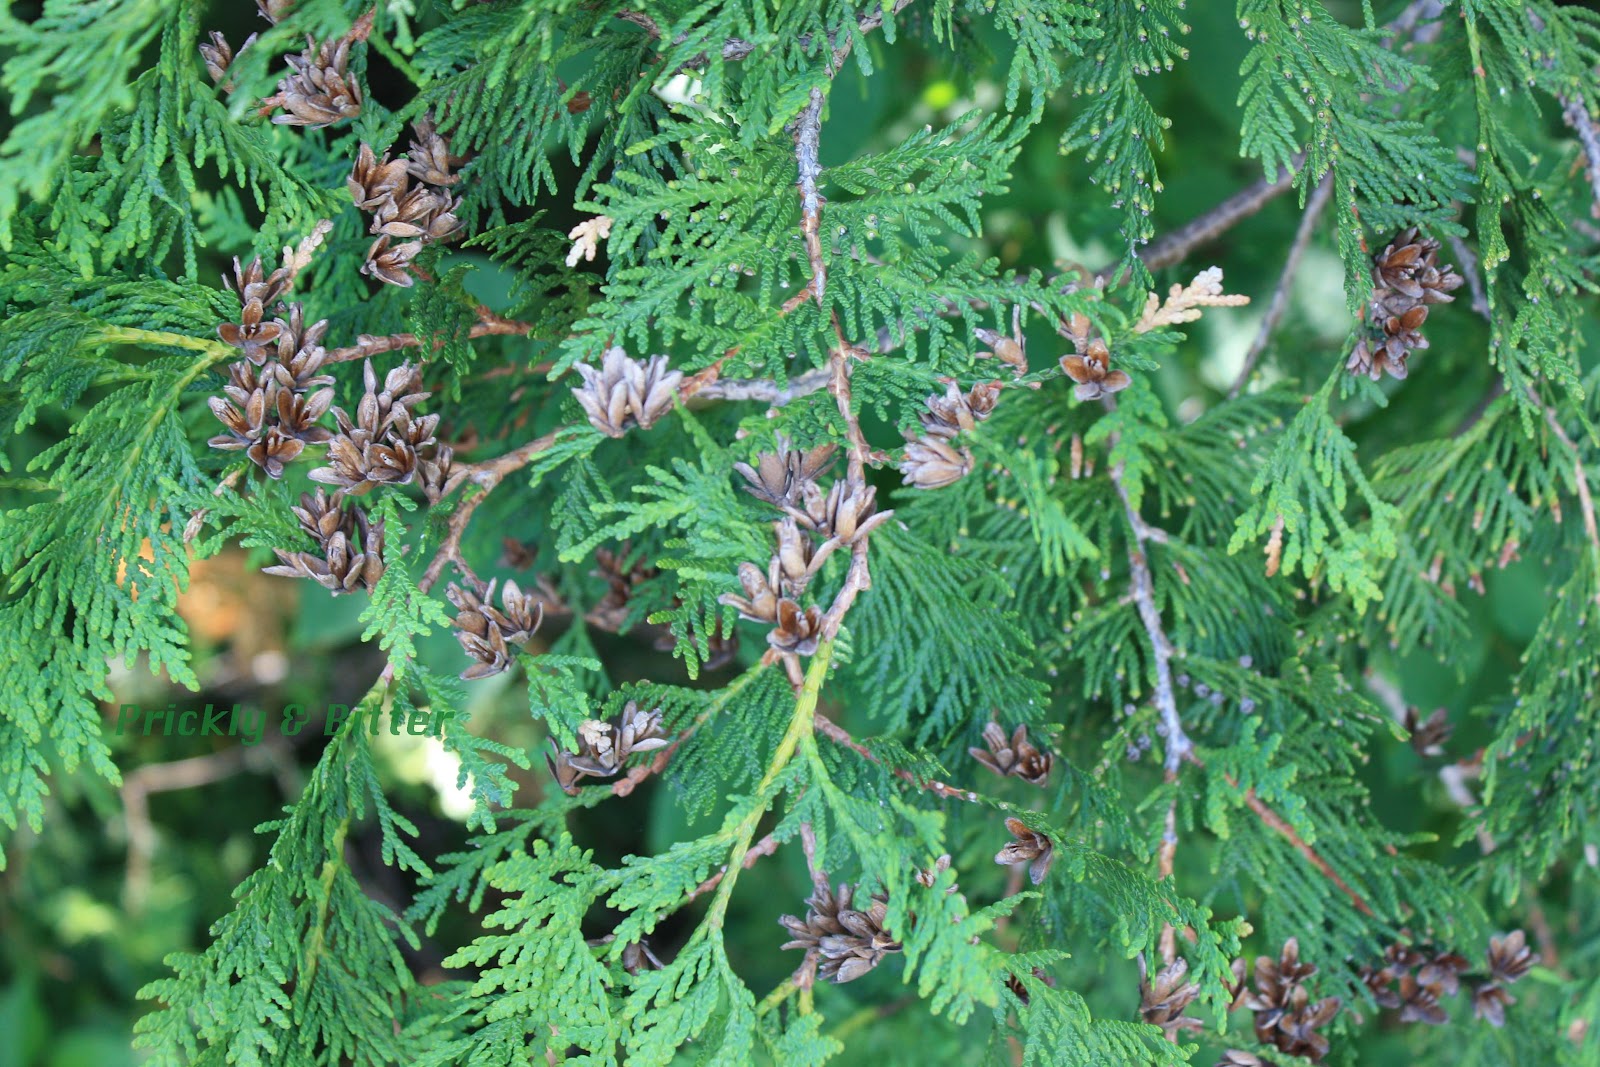 Prickly and Bitter: The Eastern White non-Cedar